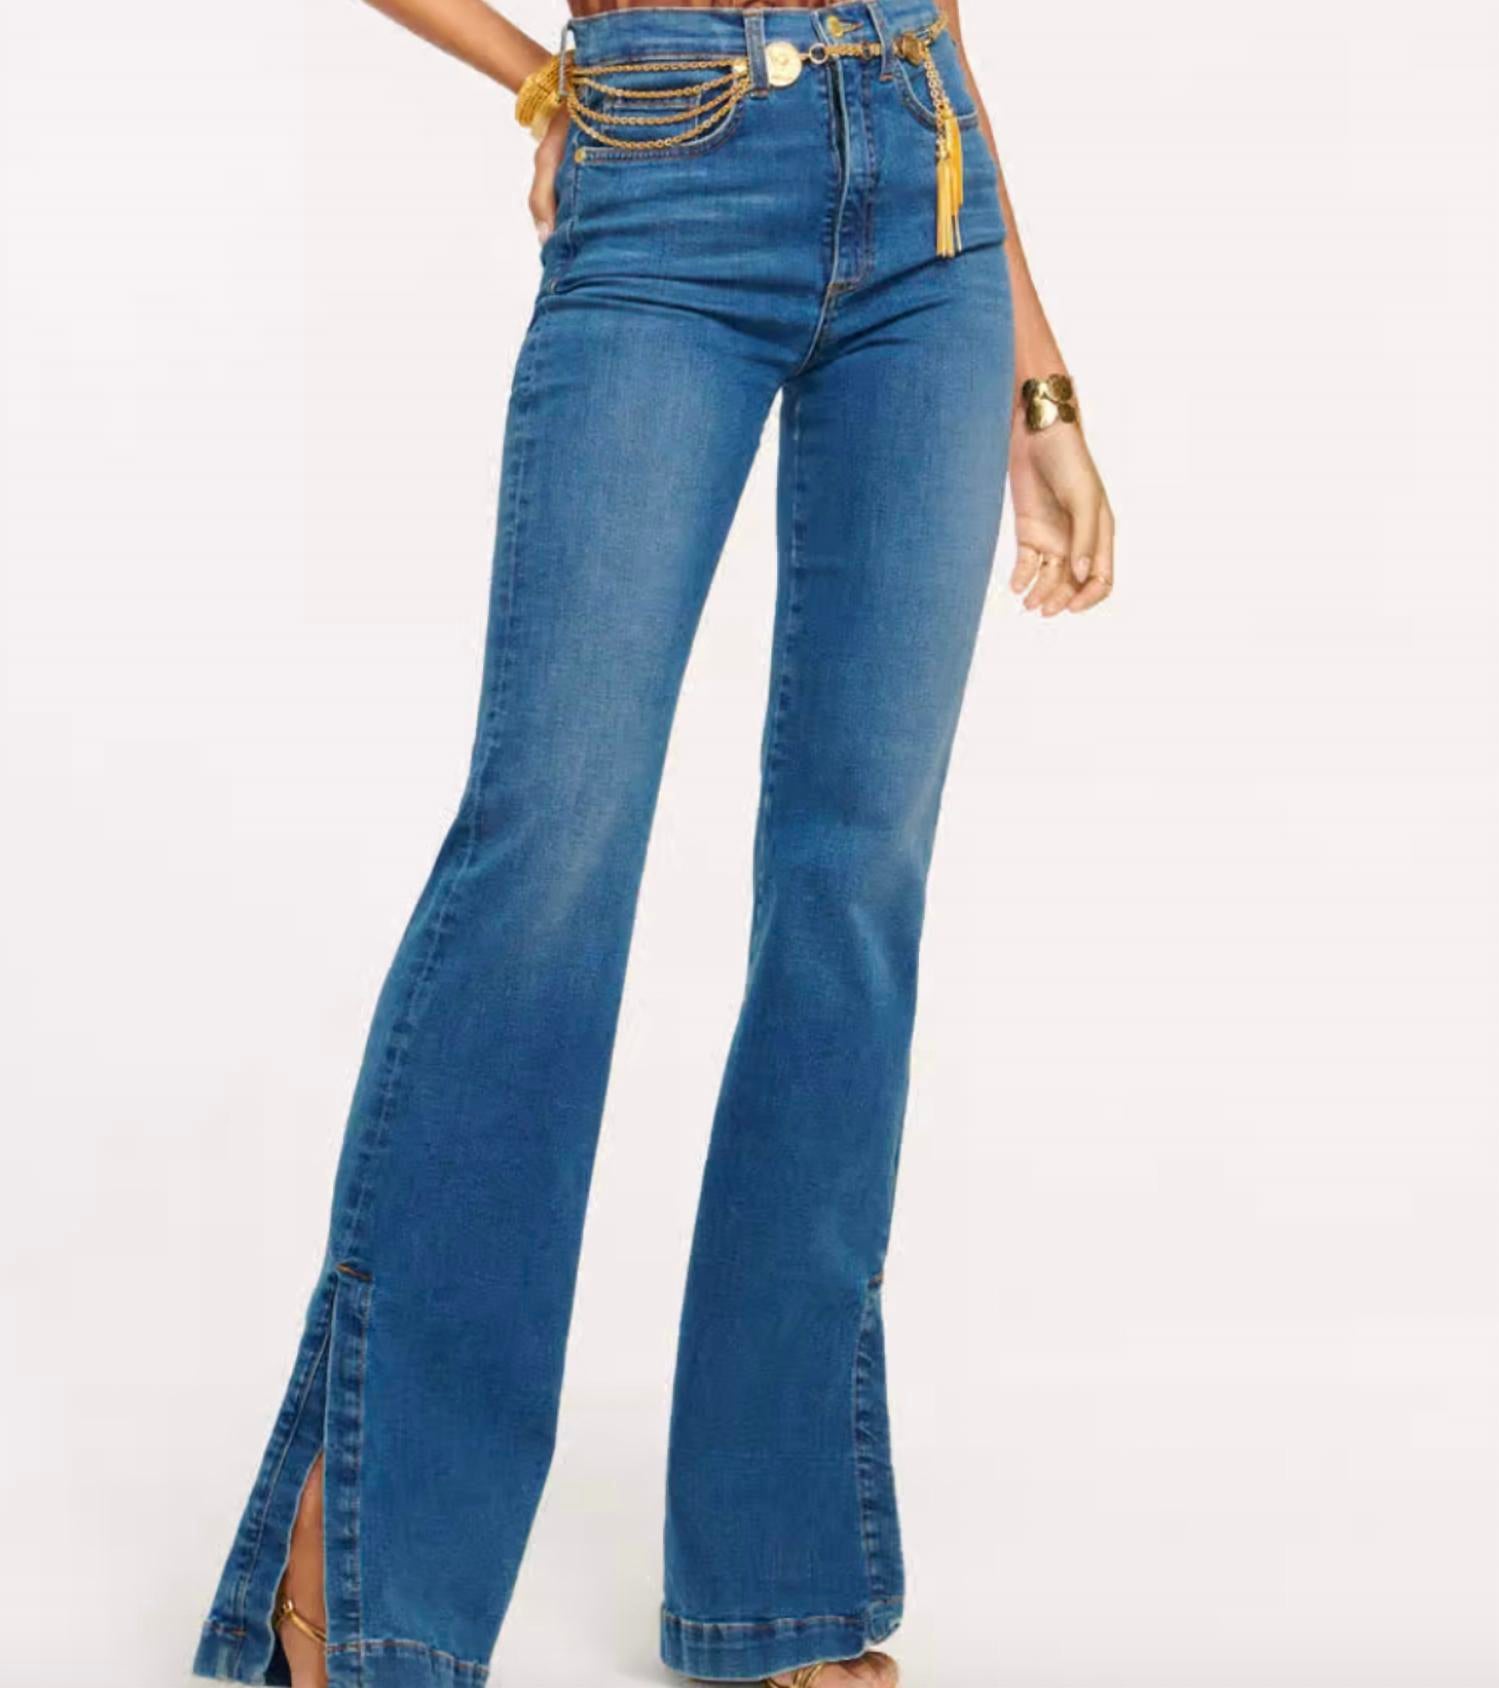 Tyra High Waisted Flare Jean in light wash